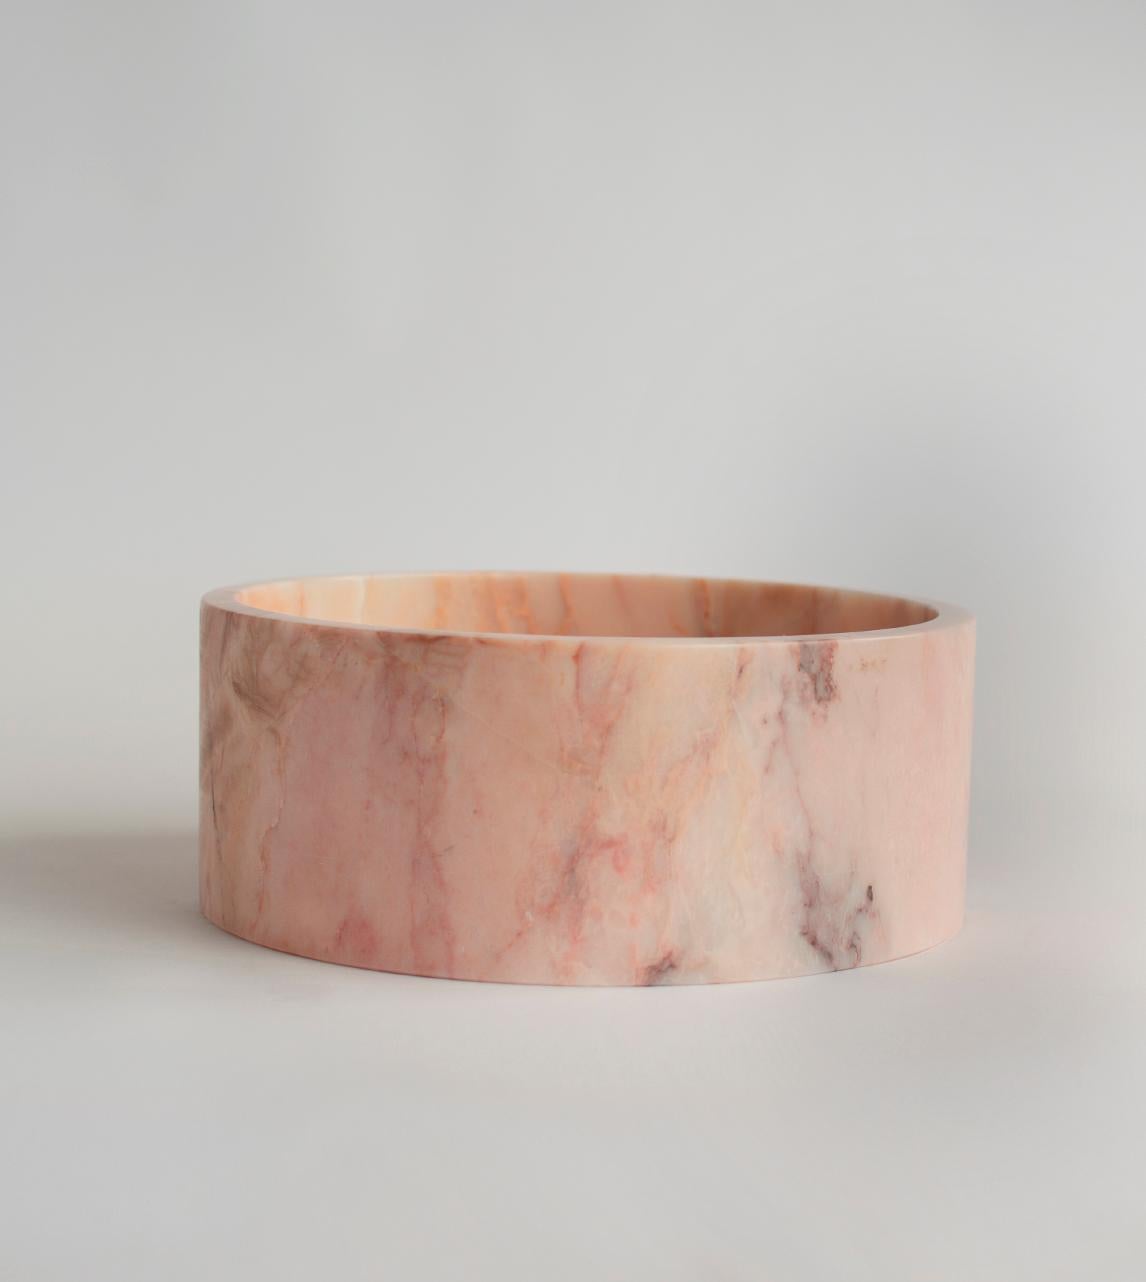 This substantial pink marble bowl is beautifully handcrafted from a single piece of genuine Turkish Black Marble and honed for a silky mat finish. 

There may be natural variations that are not product flaws, they make your design truly